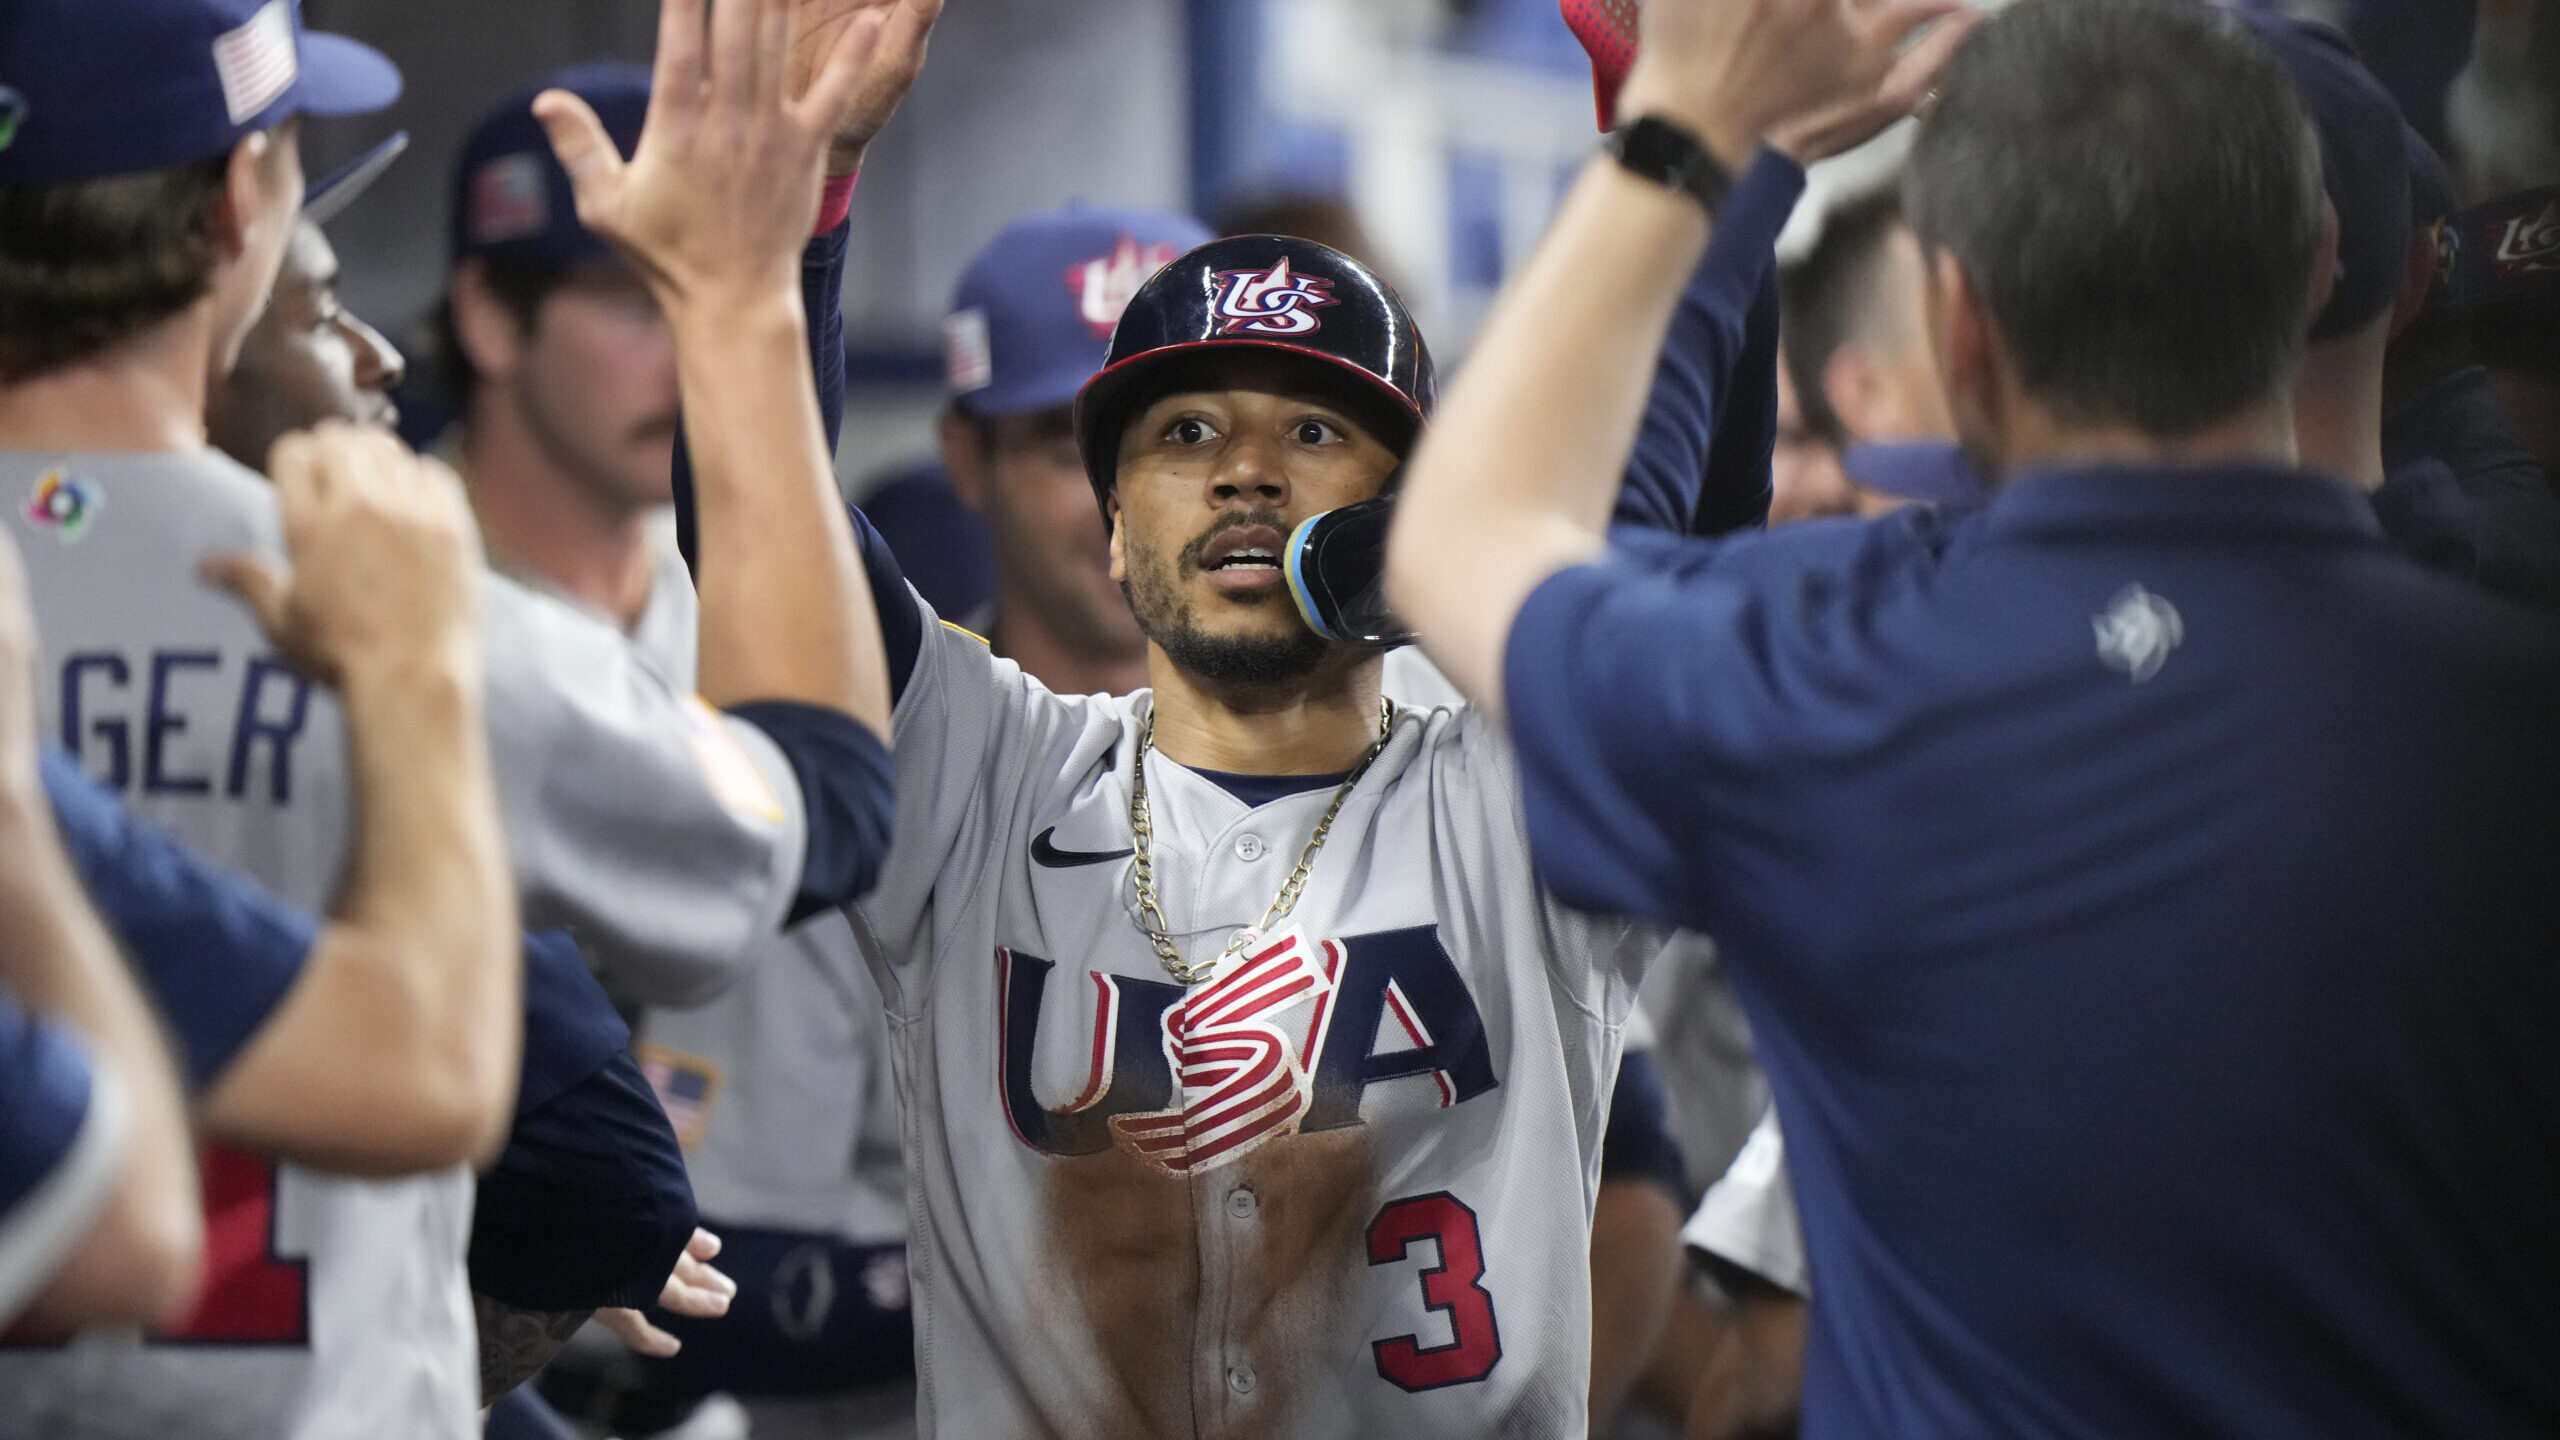 United States' Mookie Betts (3) is congratulated by teammates after he scored on a throwing error b...